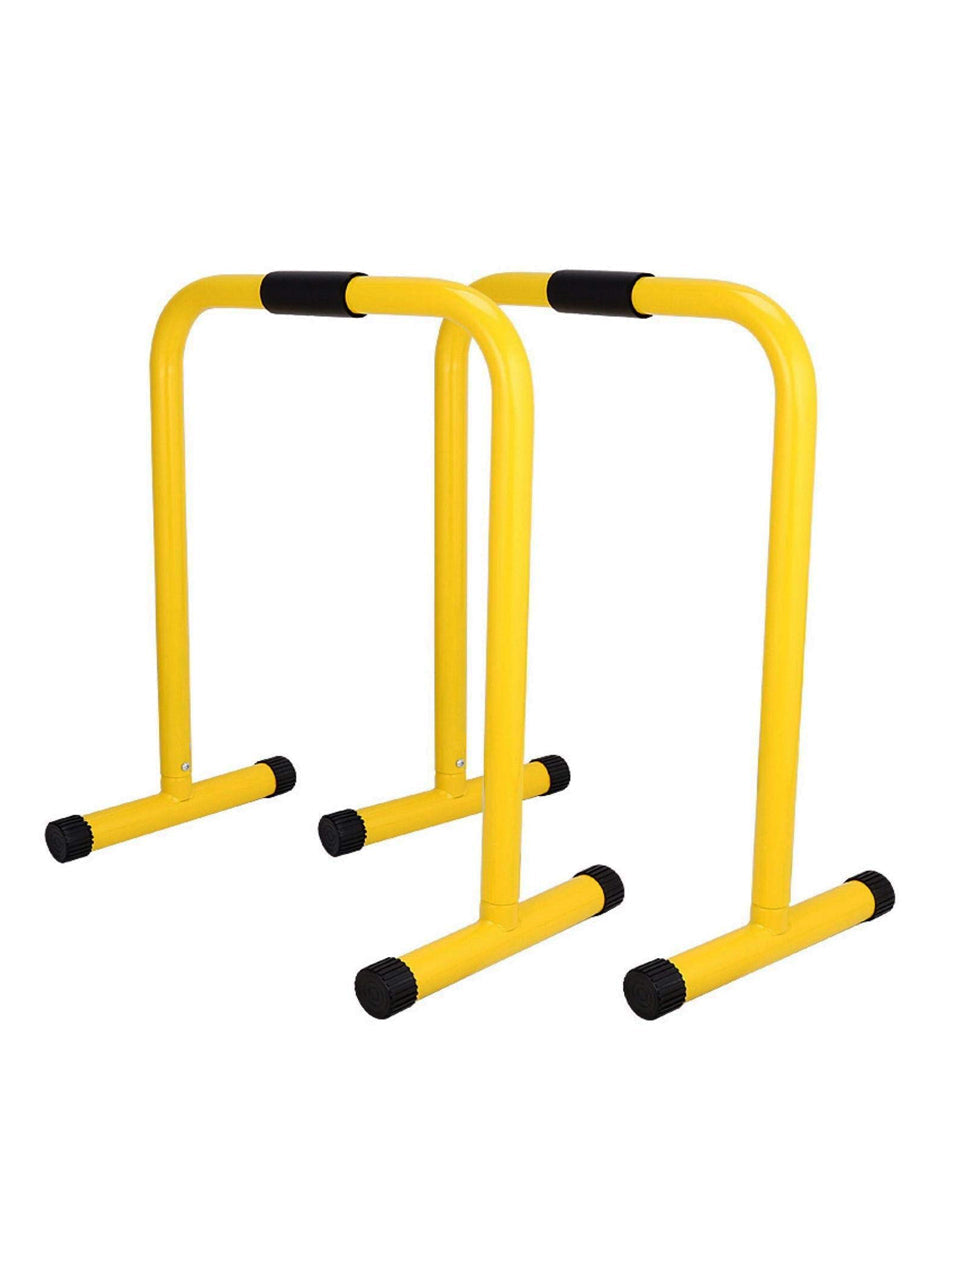 Parallettes Push Up and Dip Stand - Sold as Pair